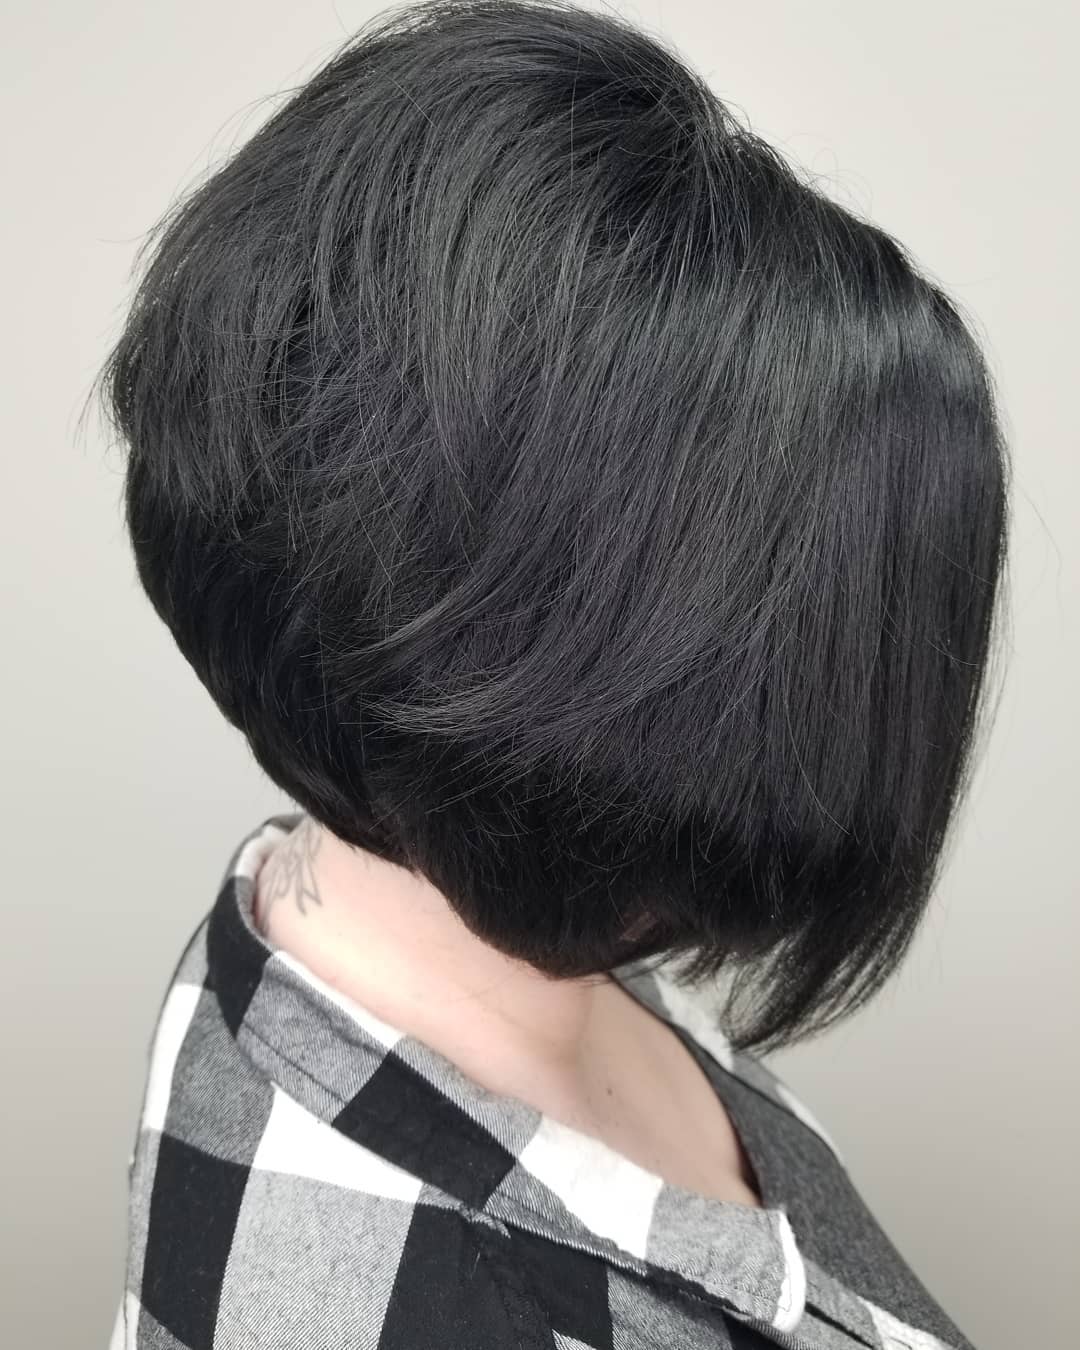 Stacked Bob 116 Long stacked bob | Medium length stacked bob | Pictures of stacked bob haircuts front and back Stacked Bob Hairstyles for Women